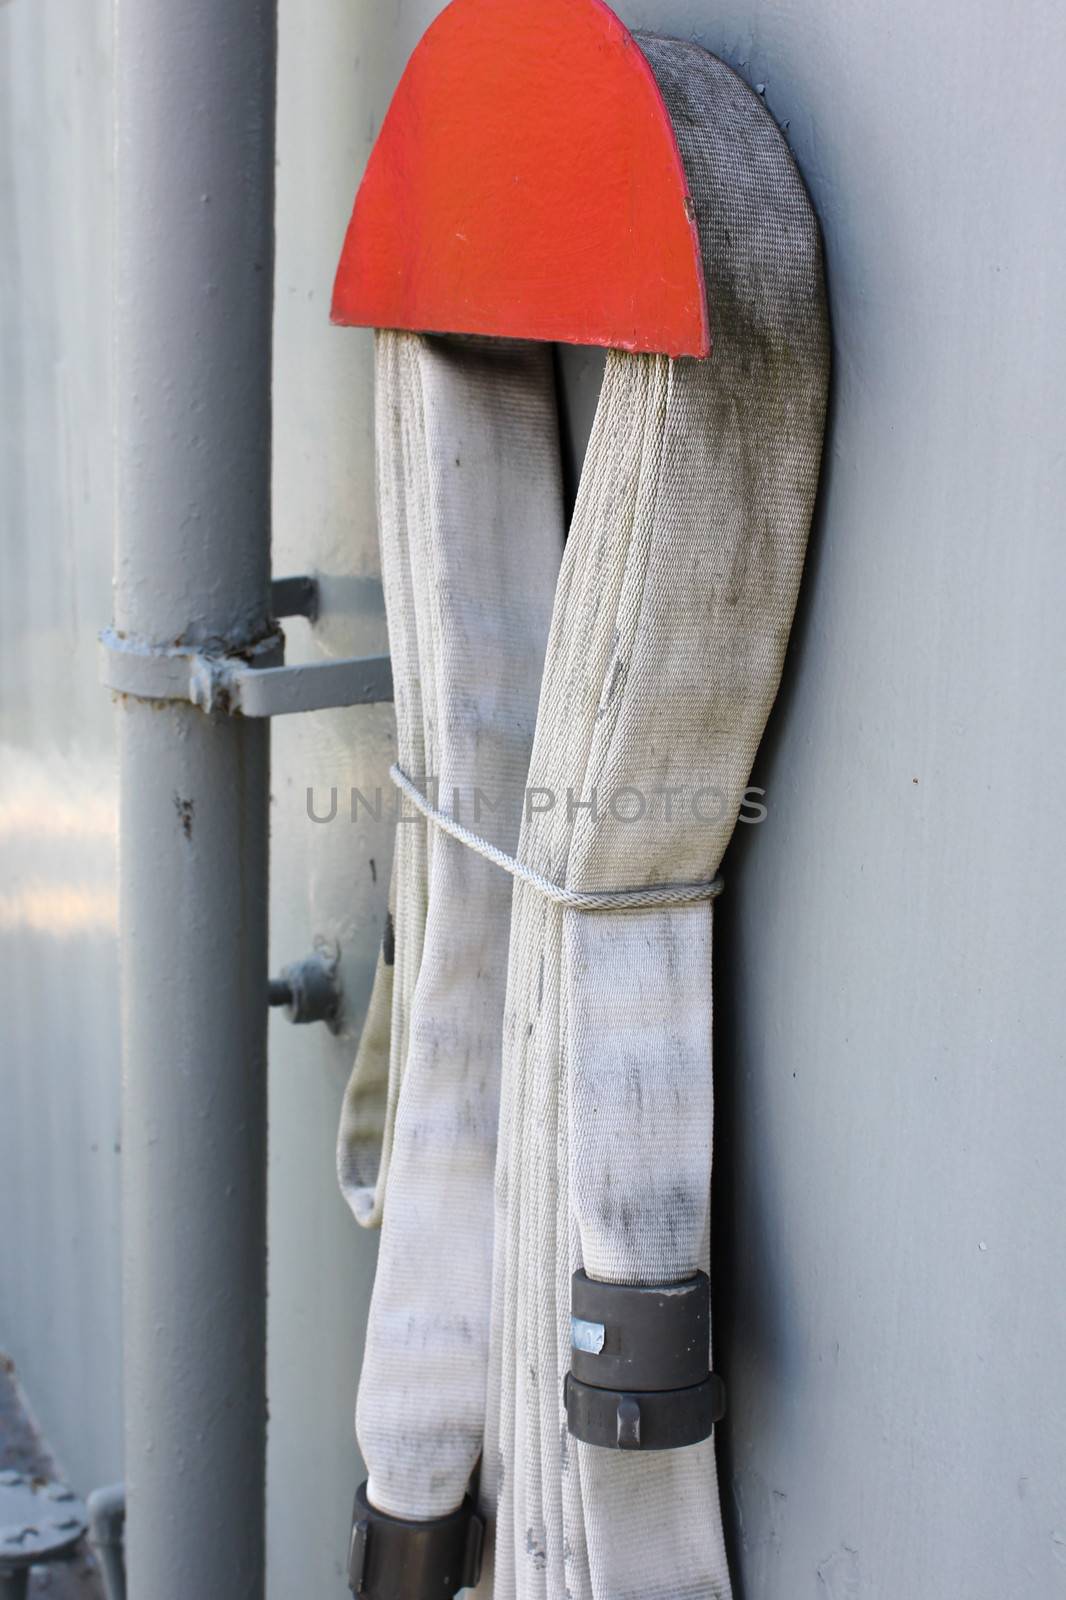 A fabric fire hose looped and stored on the wall of a ship.